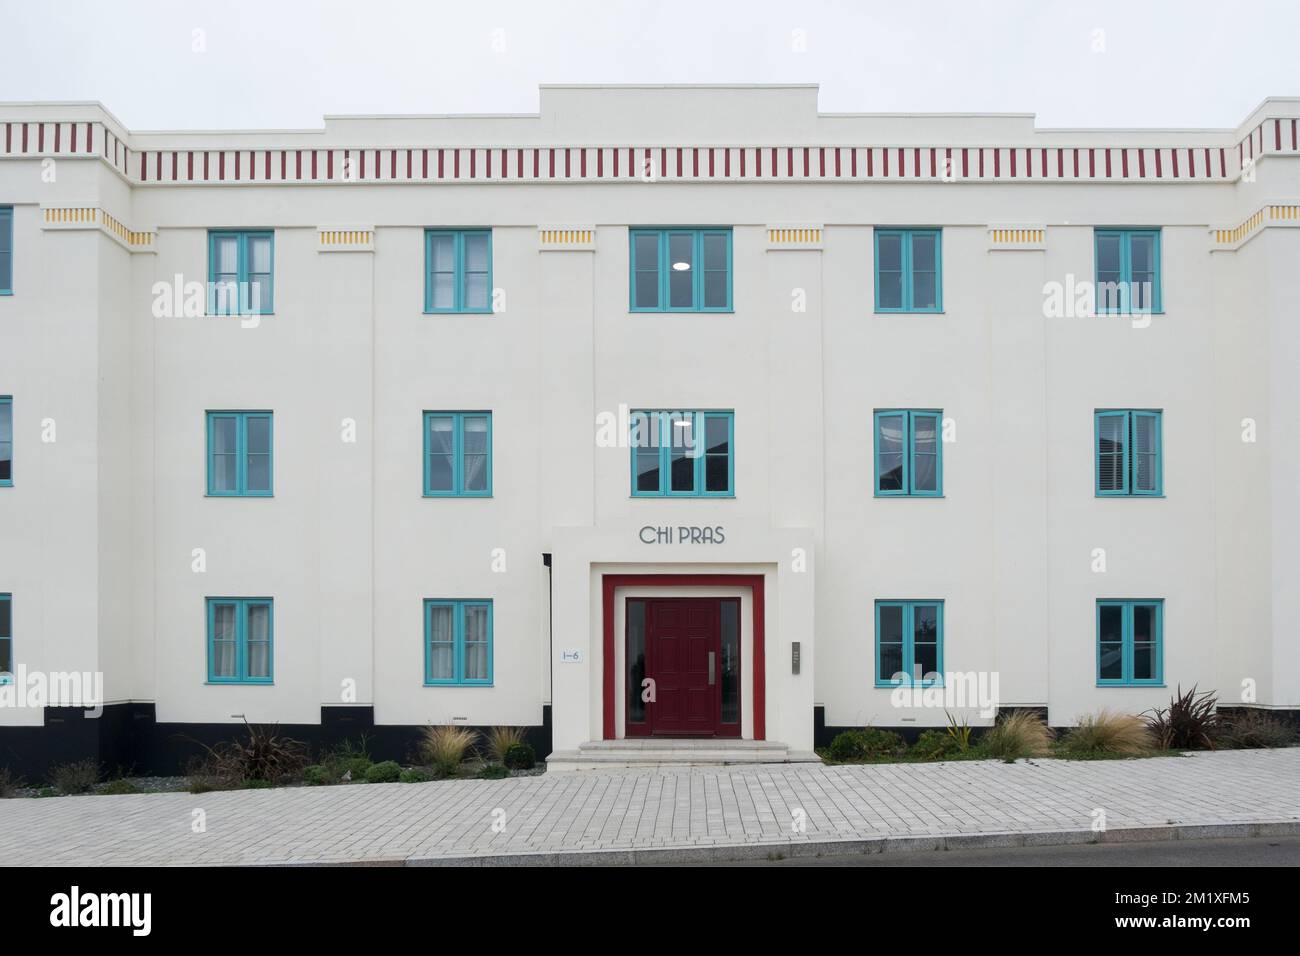 The 1930s style apartment block Chi Pras on Stret Kosti Veur Woles in Nansledan, a development by the Duchy of Cornwall in Newquay, South West England Stock Photo